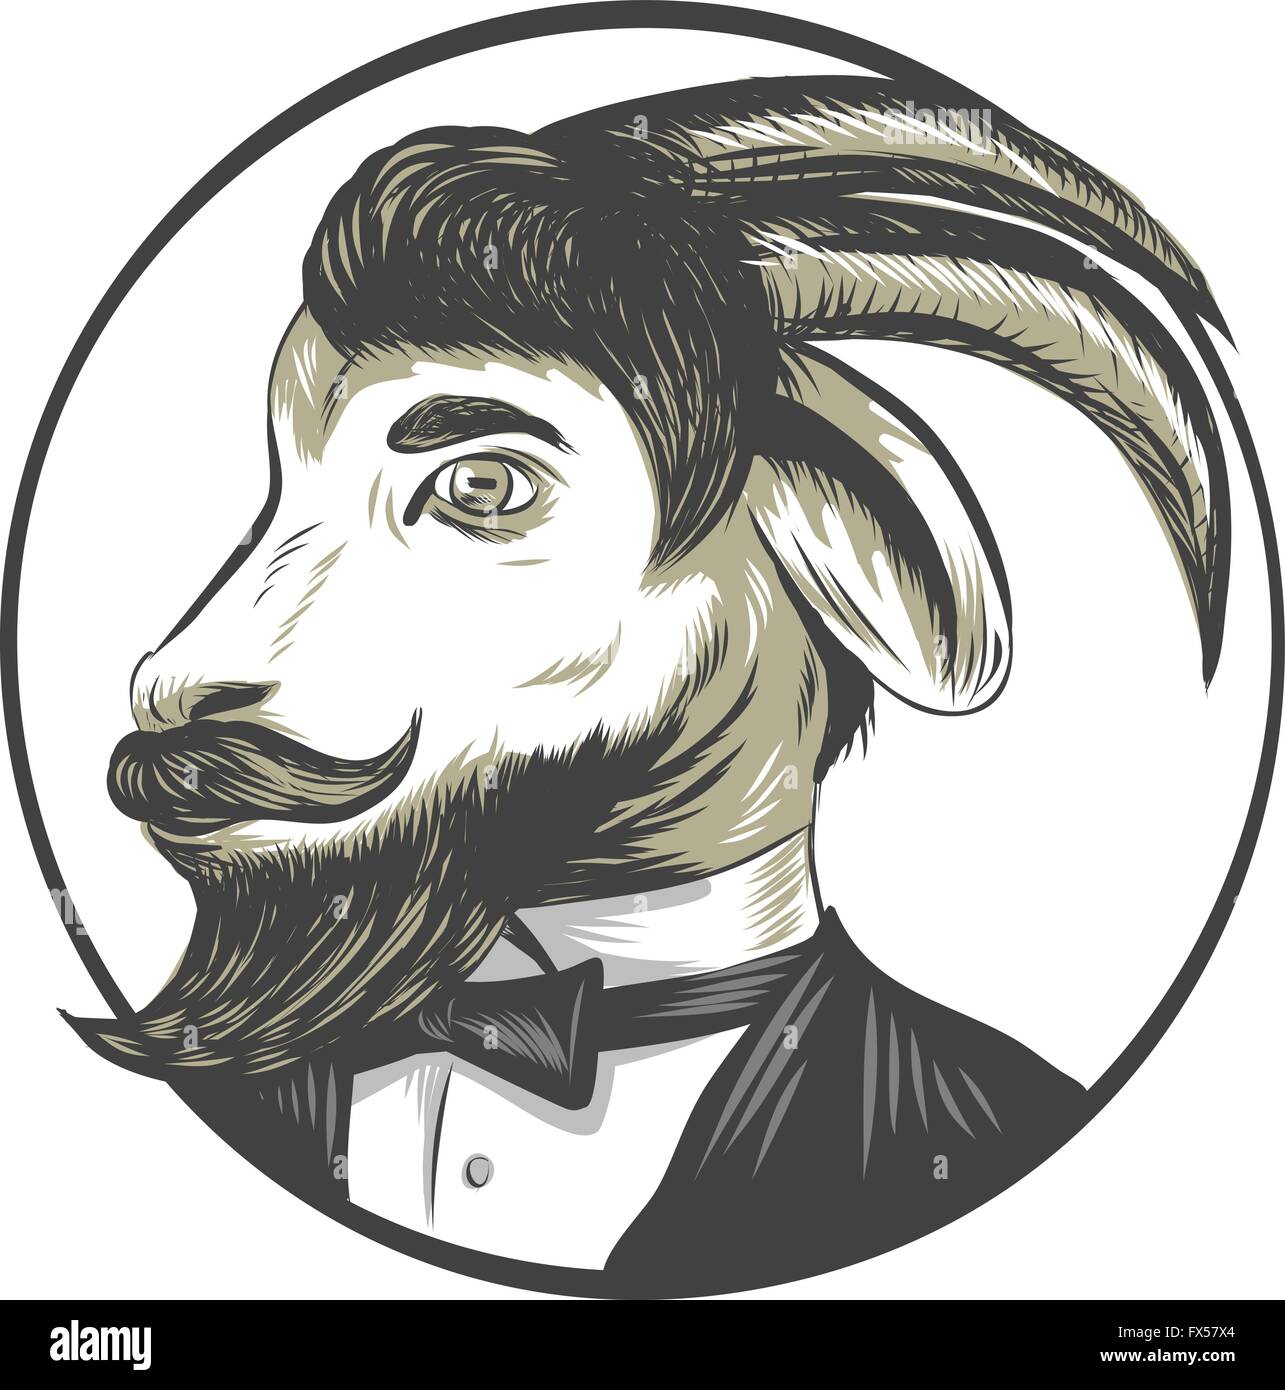 Drawing sketch style illustration of a goat ram with big horns and moustache beard owearing tie tuxedo suit looking to the side Stock Vector